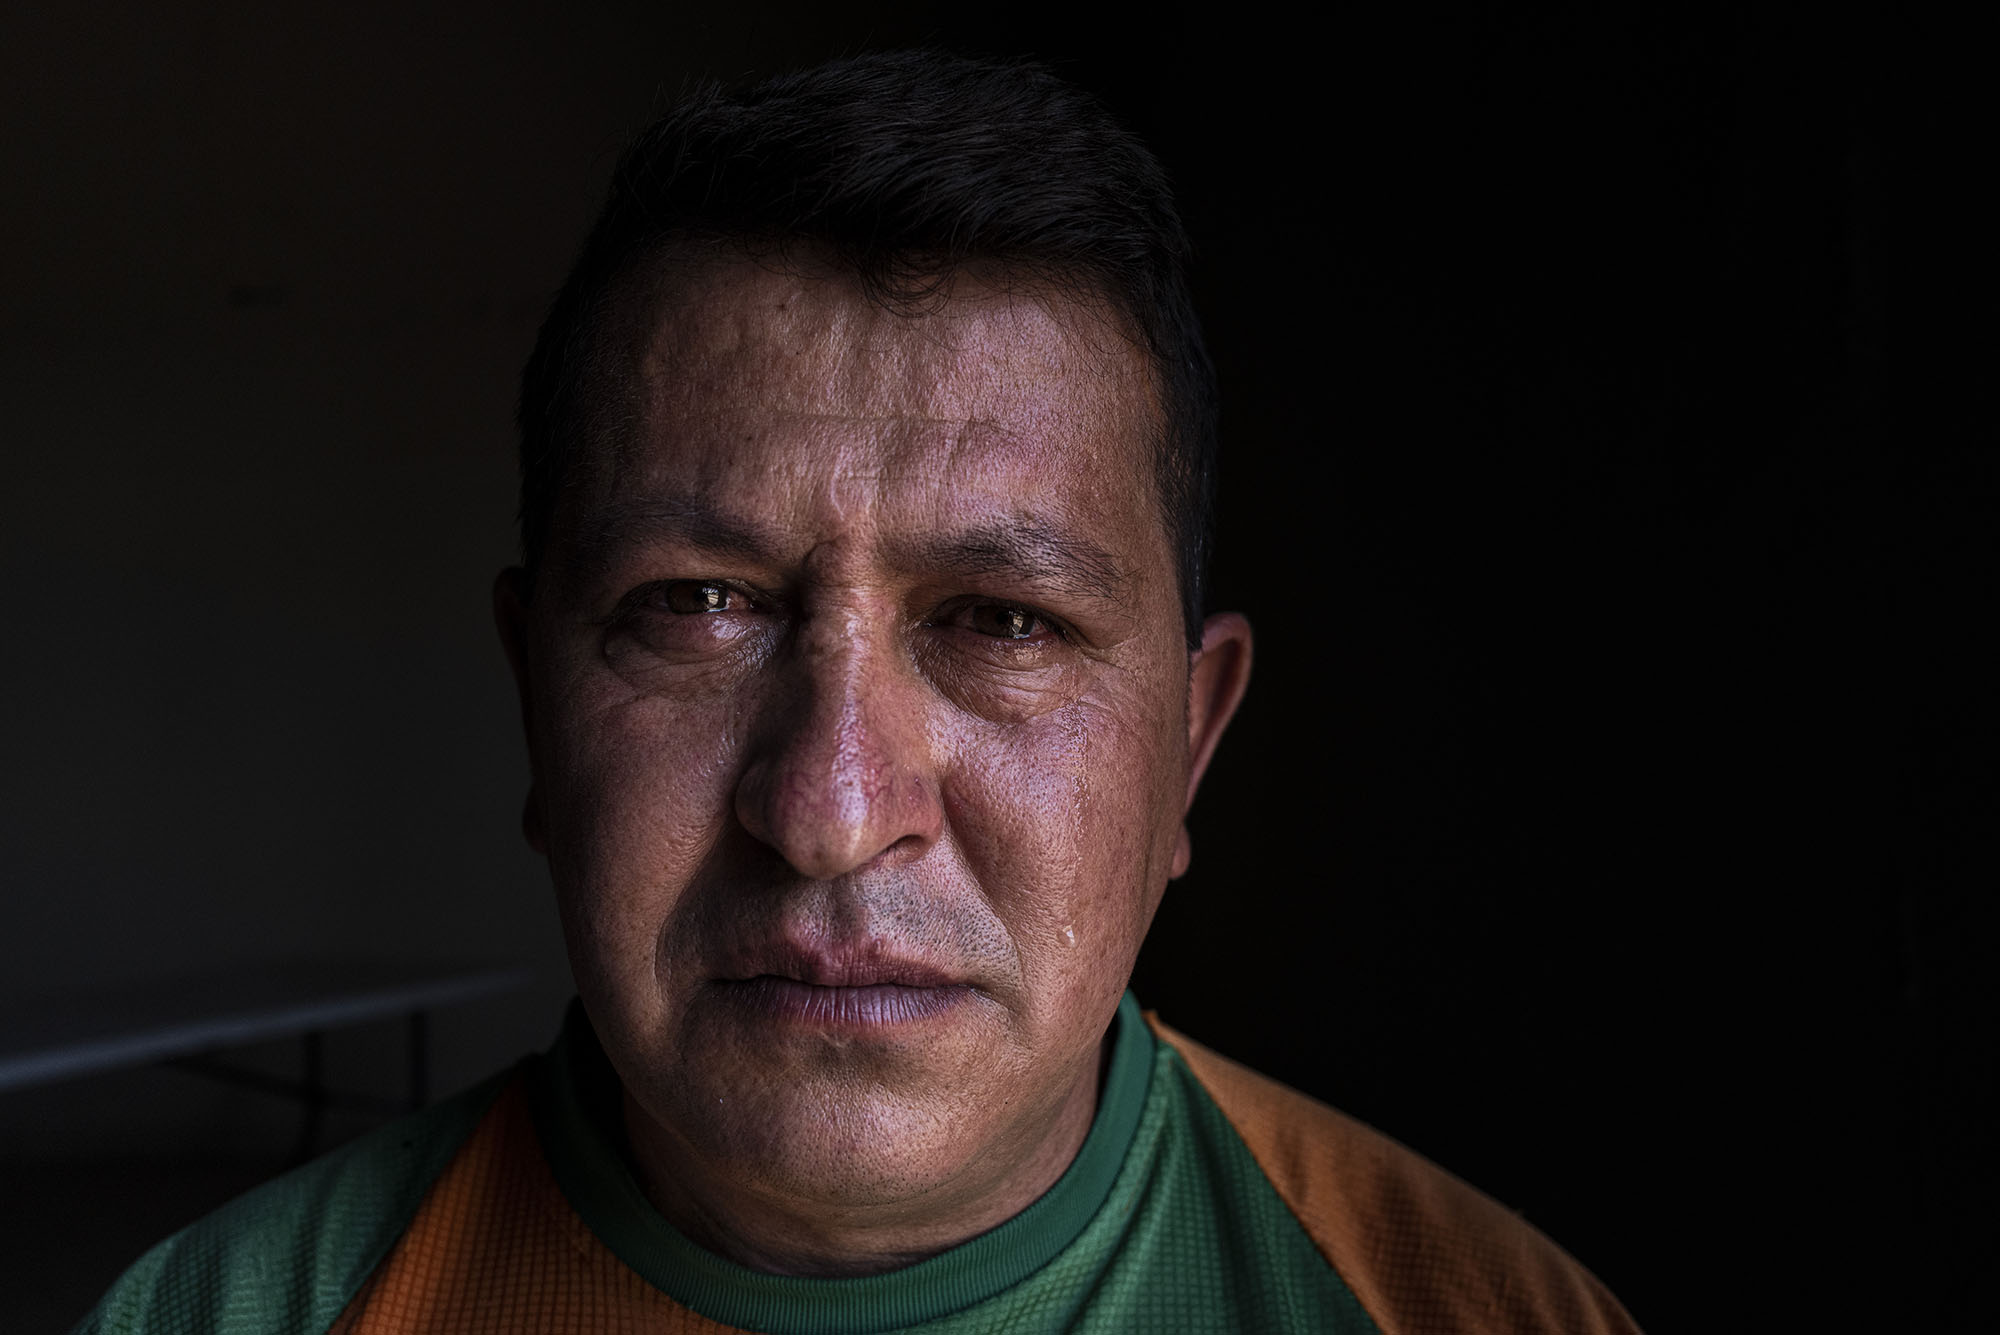 Freddy Alberto Pabon, 49, left Venezuela after his mother and brother died. He is seeking political asylum in the US for himself and his remaining family members. 